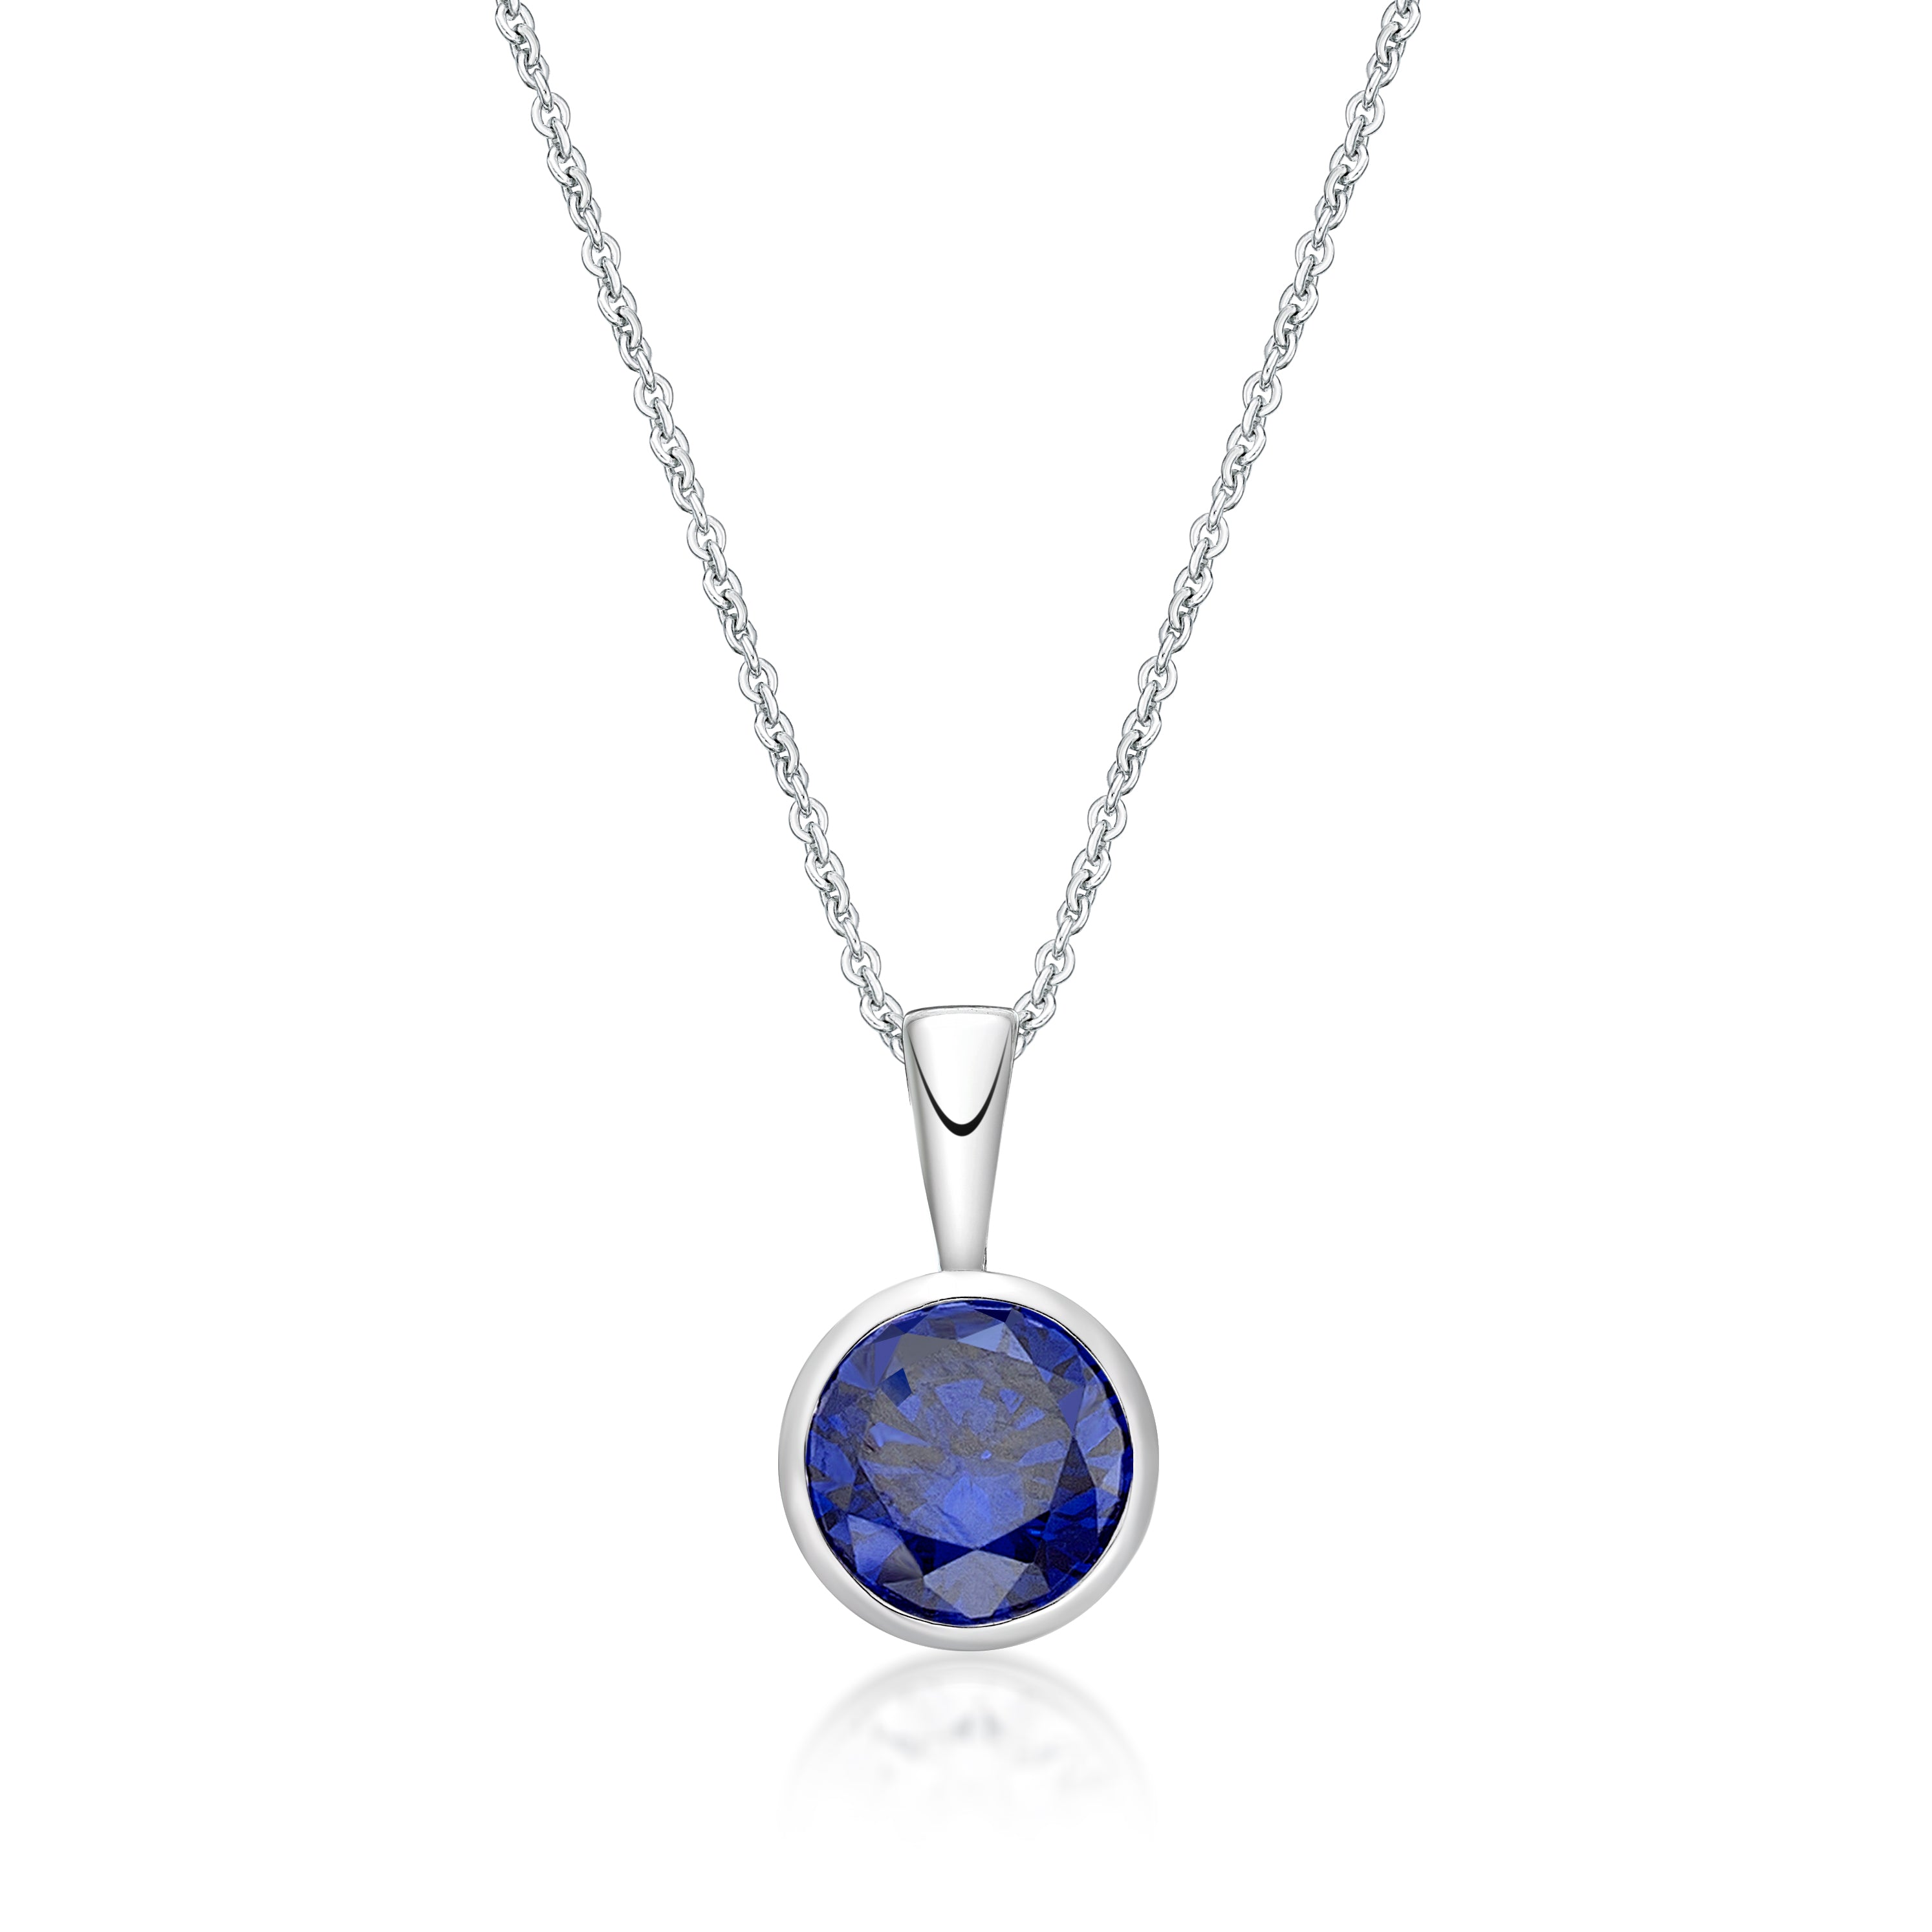 Sterling Silver February Birthstone Pendant and Chain